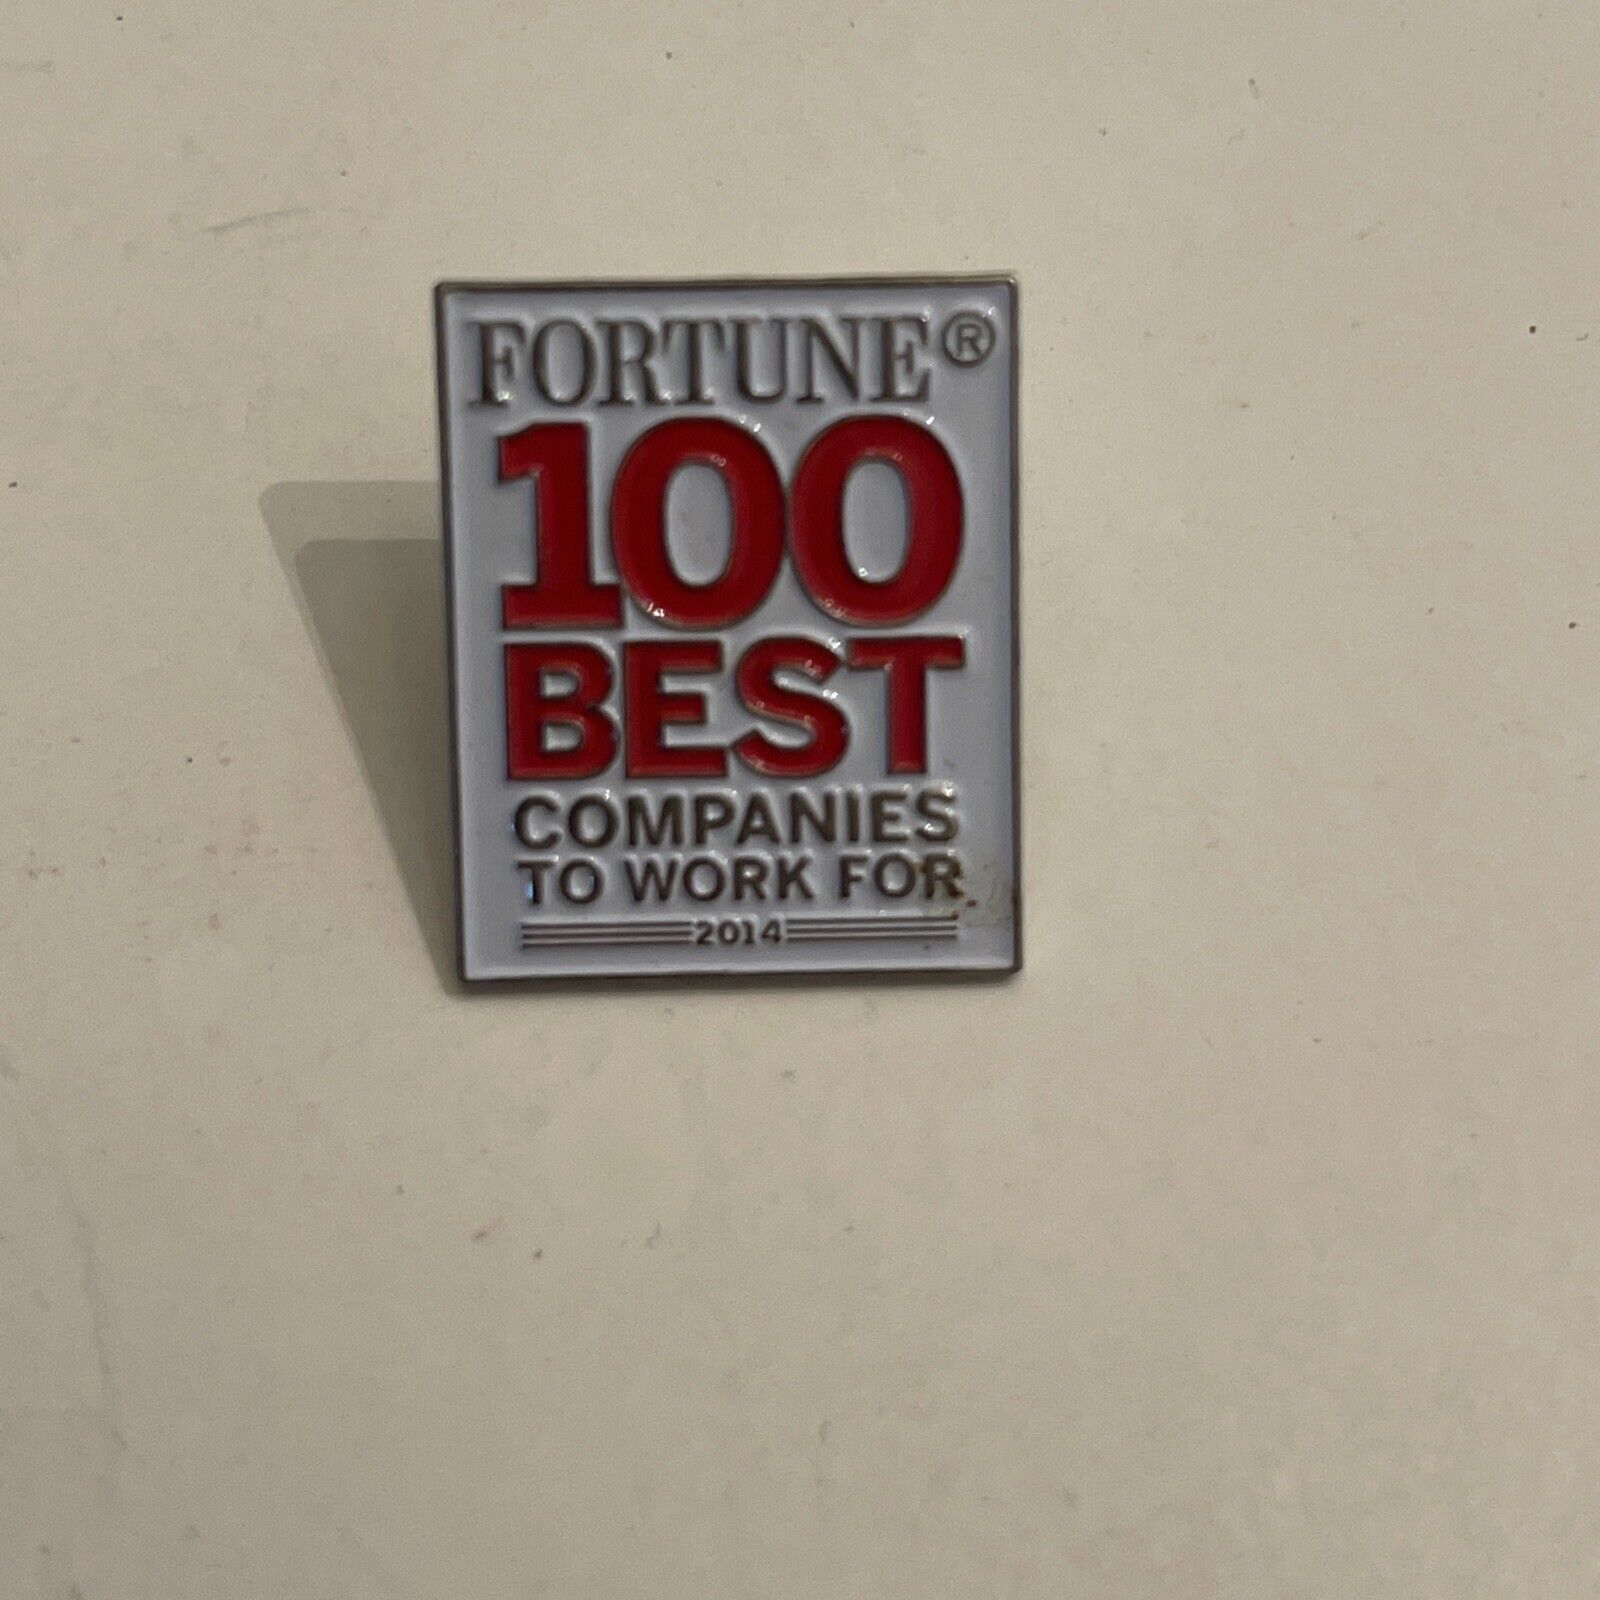 Fortune 100 Best Companies To Work For 2011 Award Enamel Lapel Pin 1\